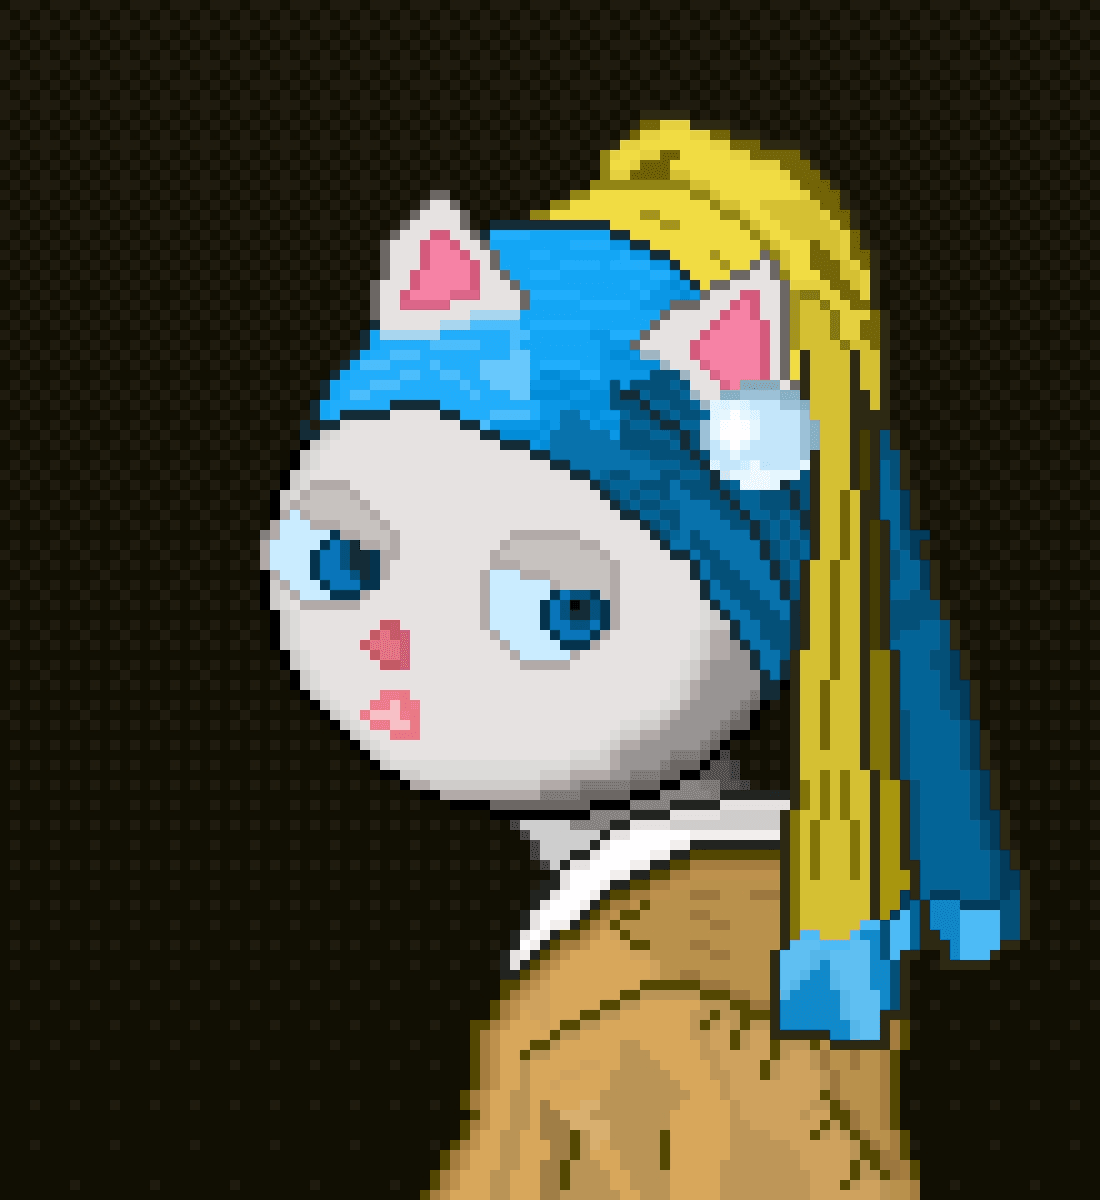 Cat with a Pearl Earring